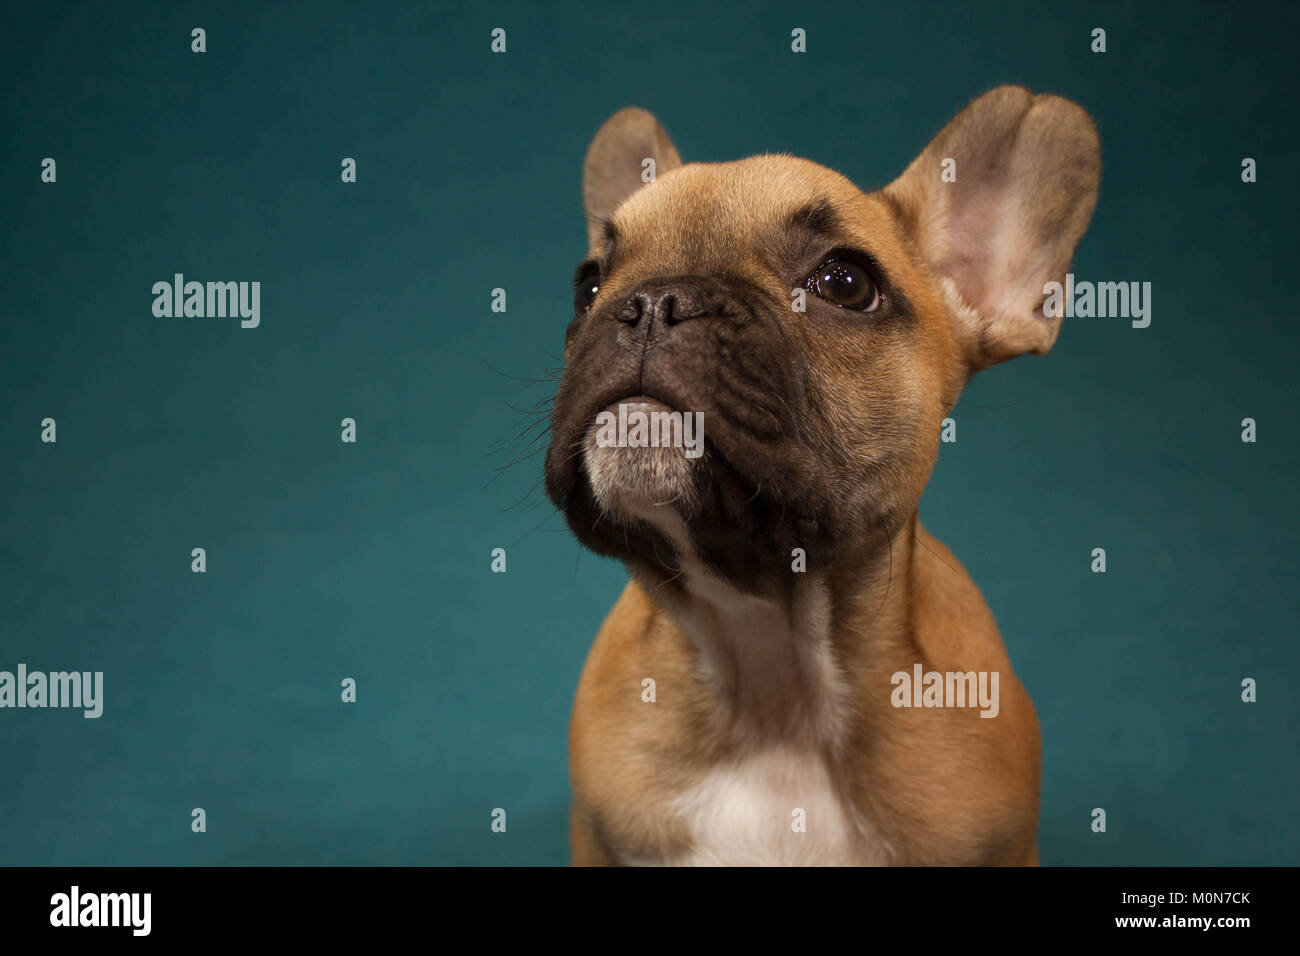 French bulldog puppy portrait looking at camera, studio photography in torquoise background Stock Photo